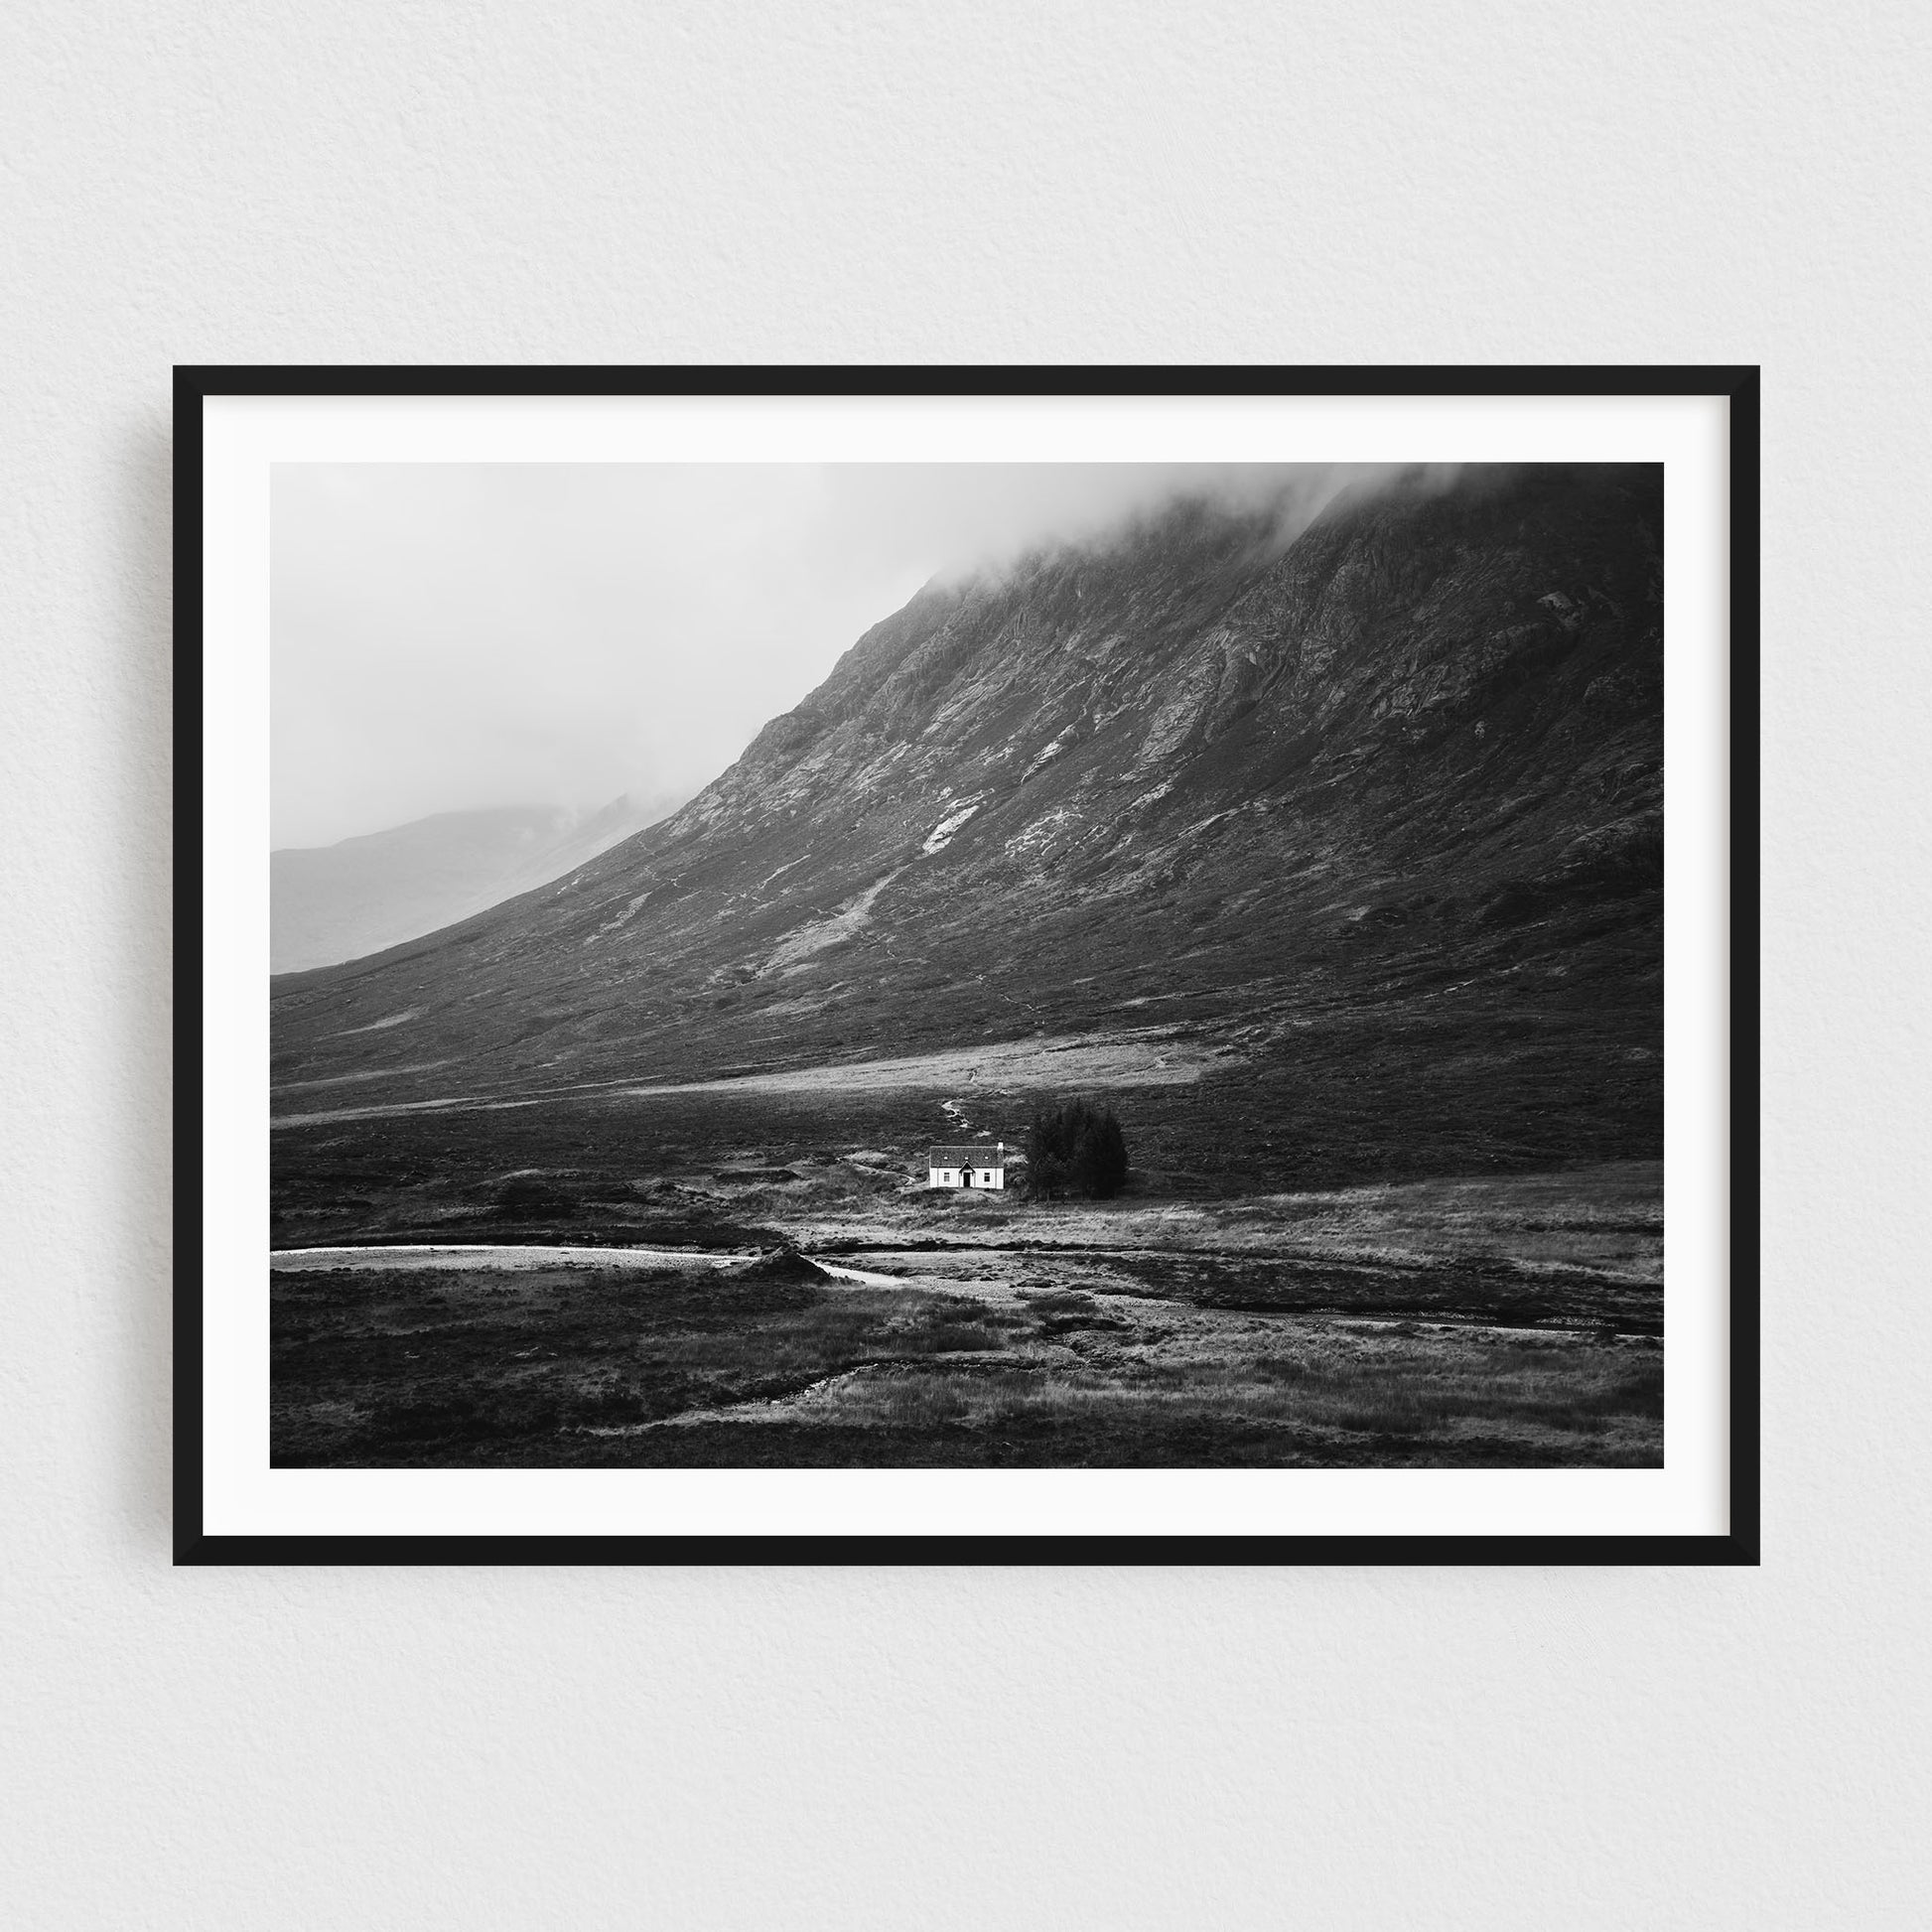 Black And White Landscape Print - Wee White Cottage in Glencoe in Scotland